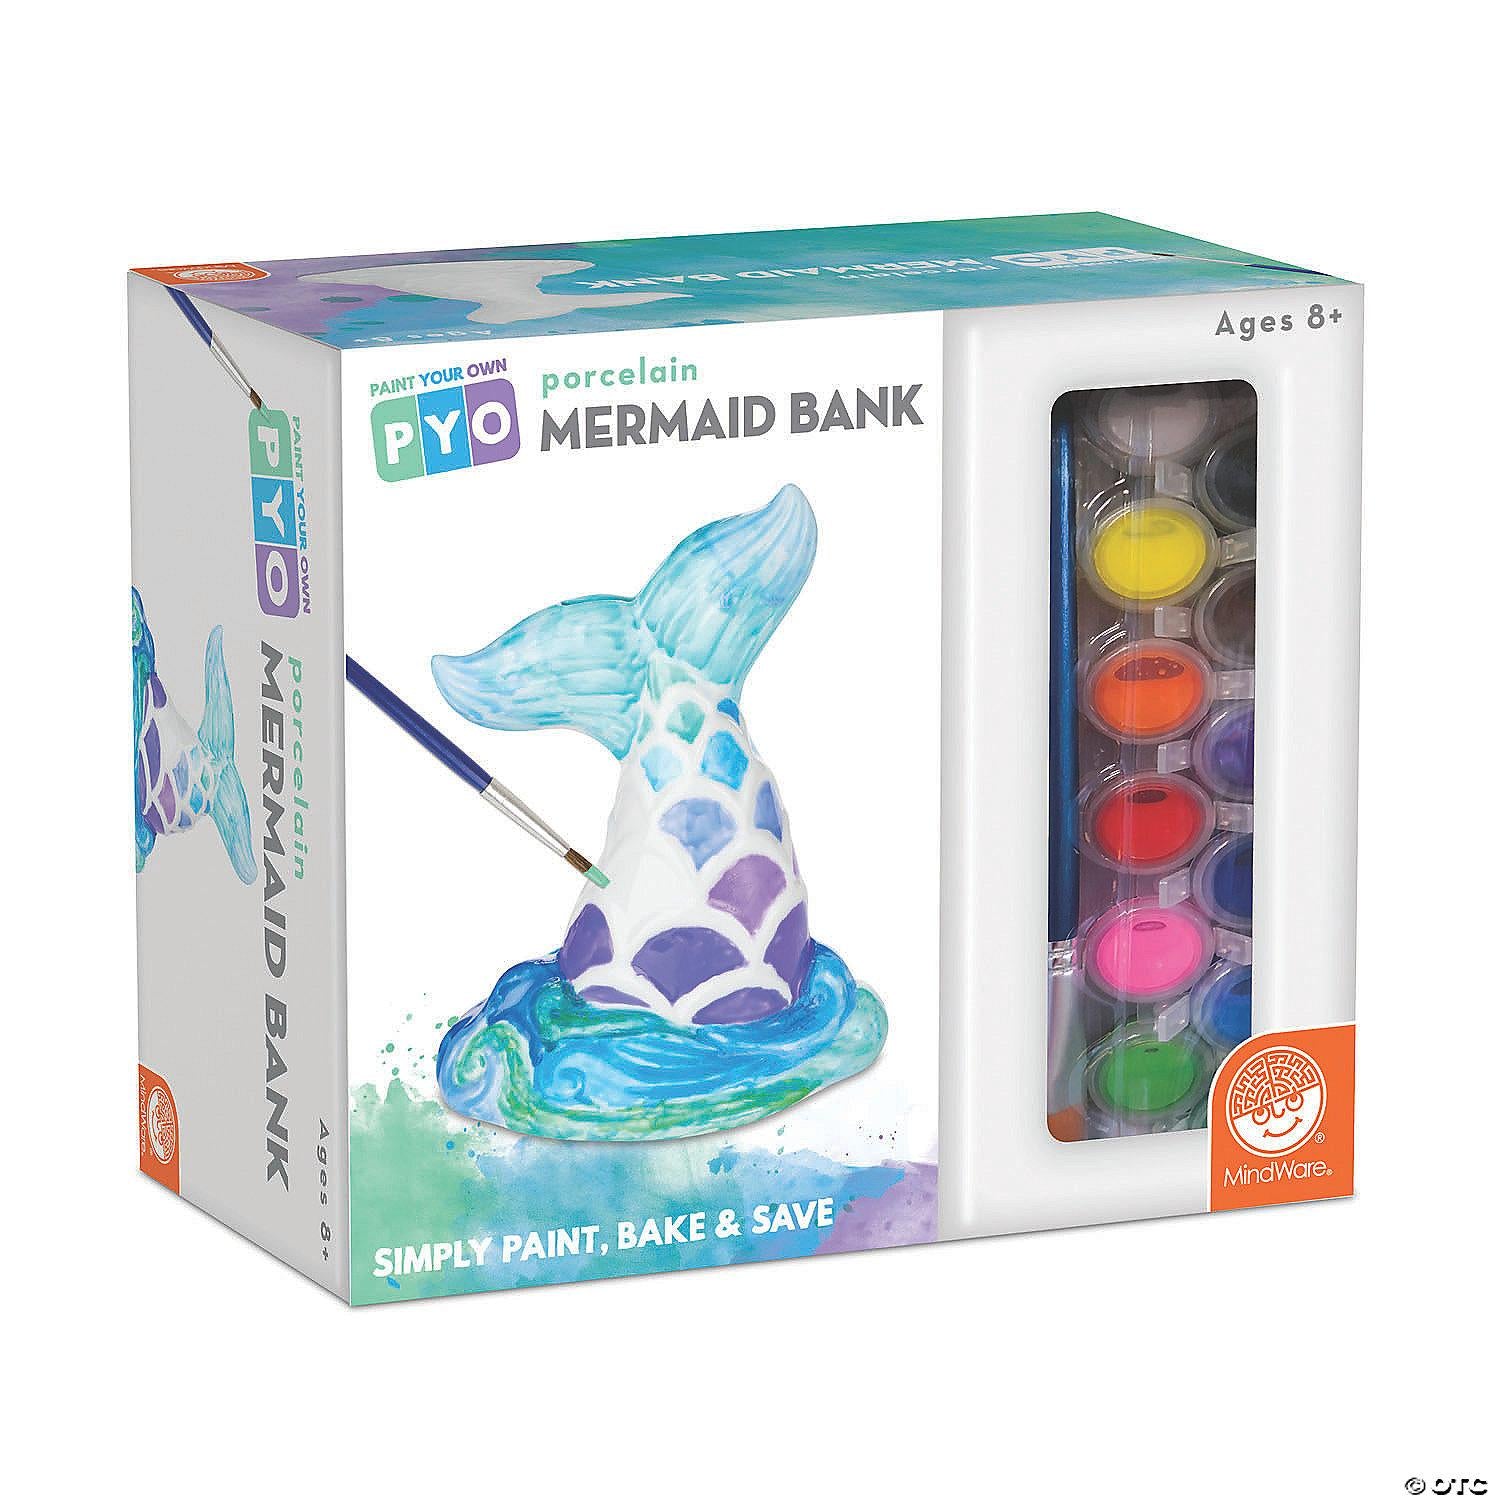 Mermaid Bank Paint Your Own